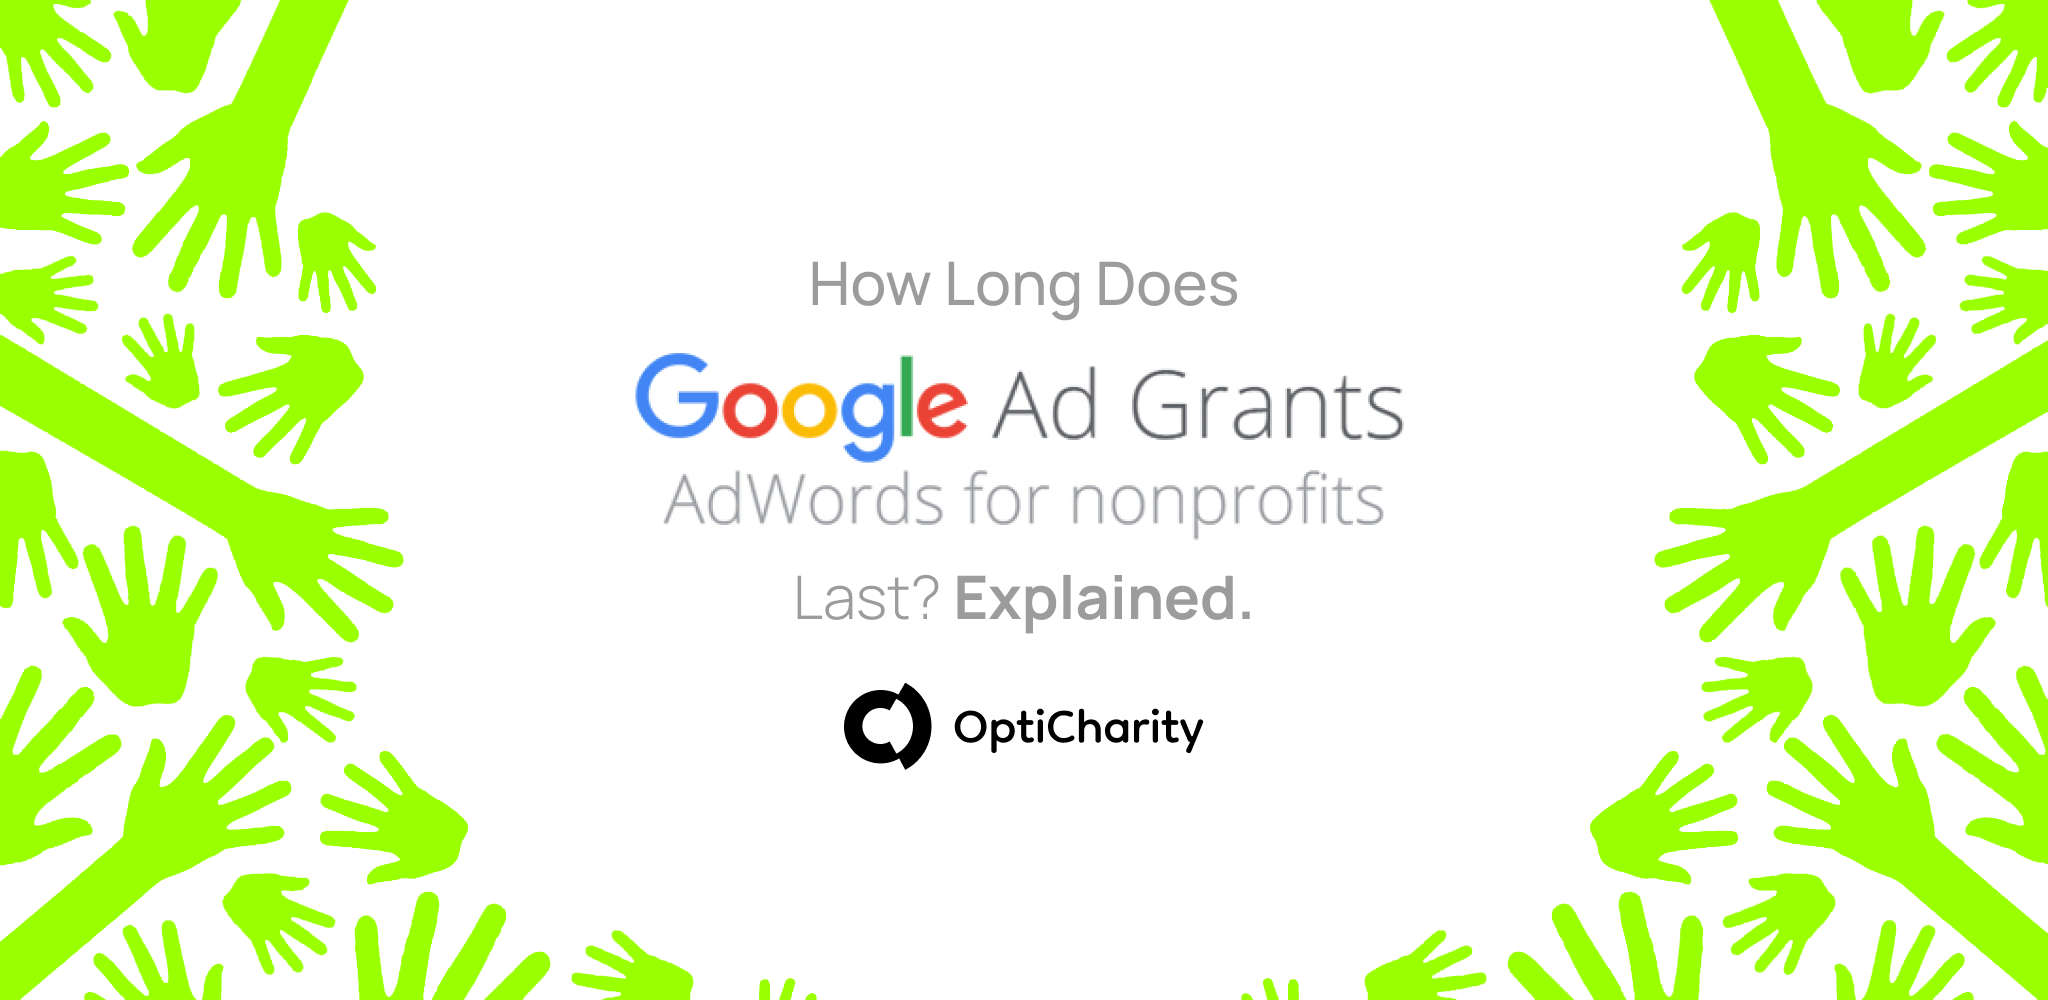 How Long Does the Google Ad Grant Last for Nonprofits? Explained.